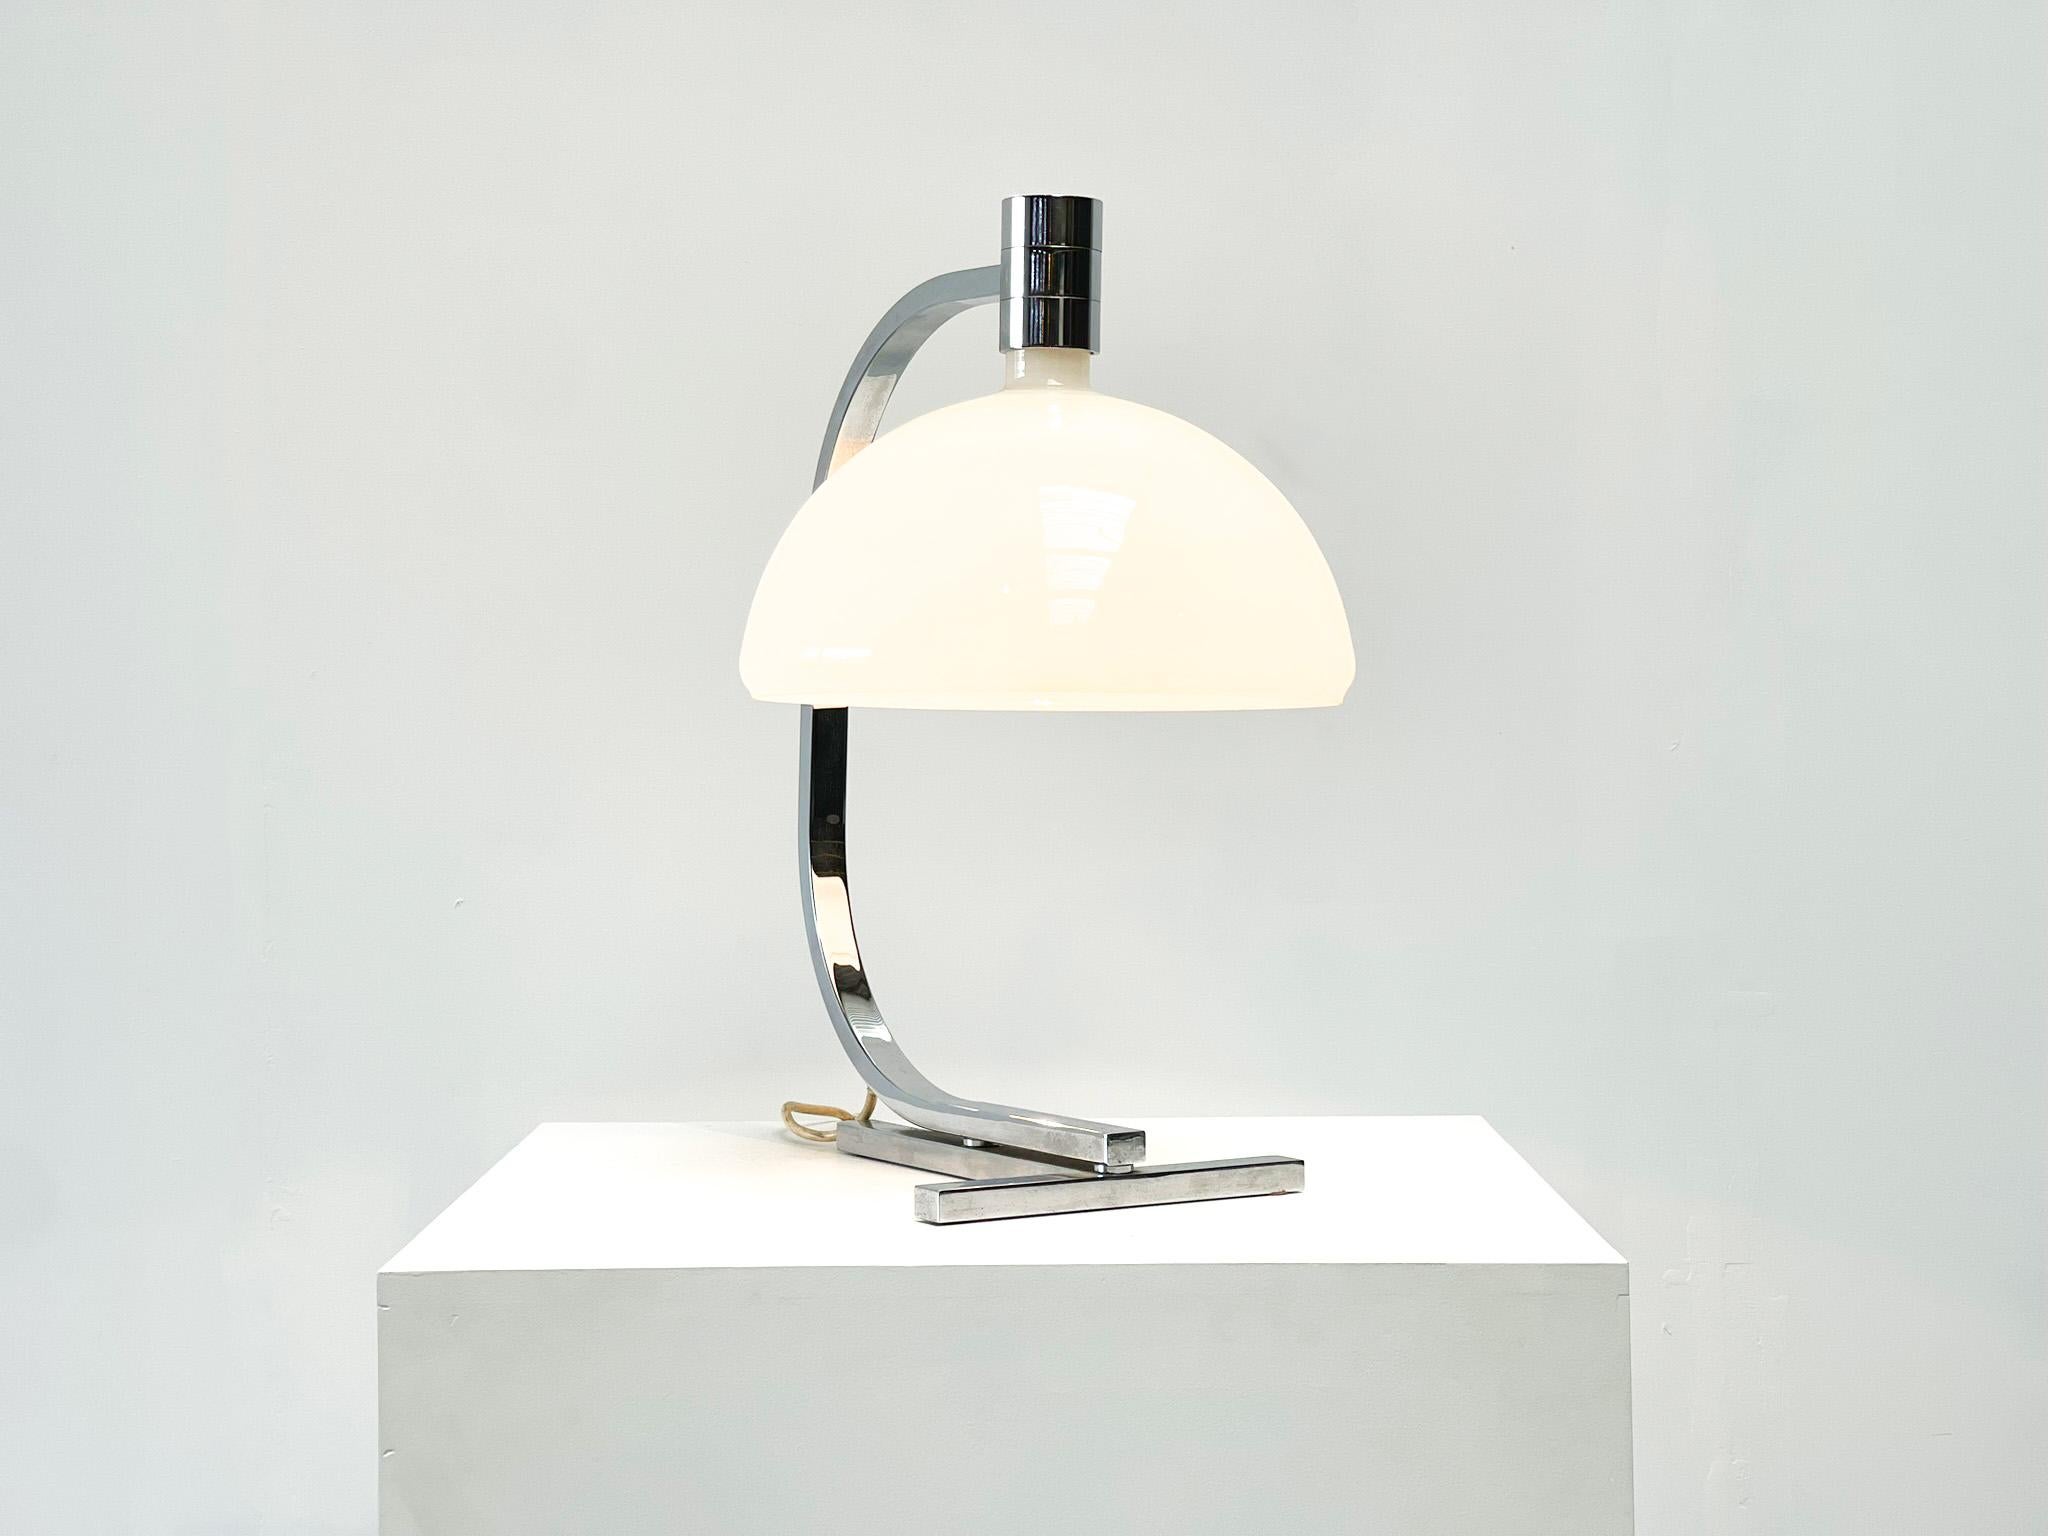 Beautiful table lamp designed by renowned Italian designer Fanco Albini. Albini designed the AM/AS series for well-known manufacturer Sirrah. This series was one of the best selling series of Sirrah. These lamps are known for their good quality and